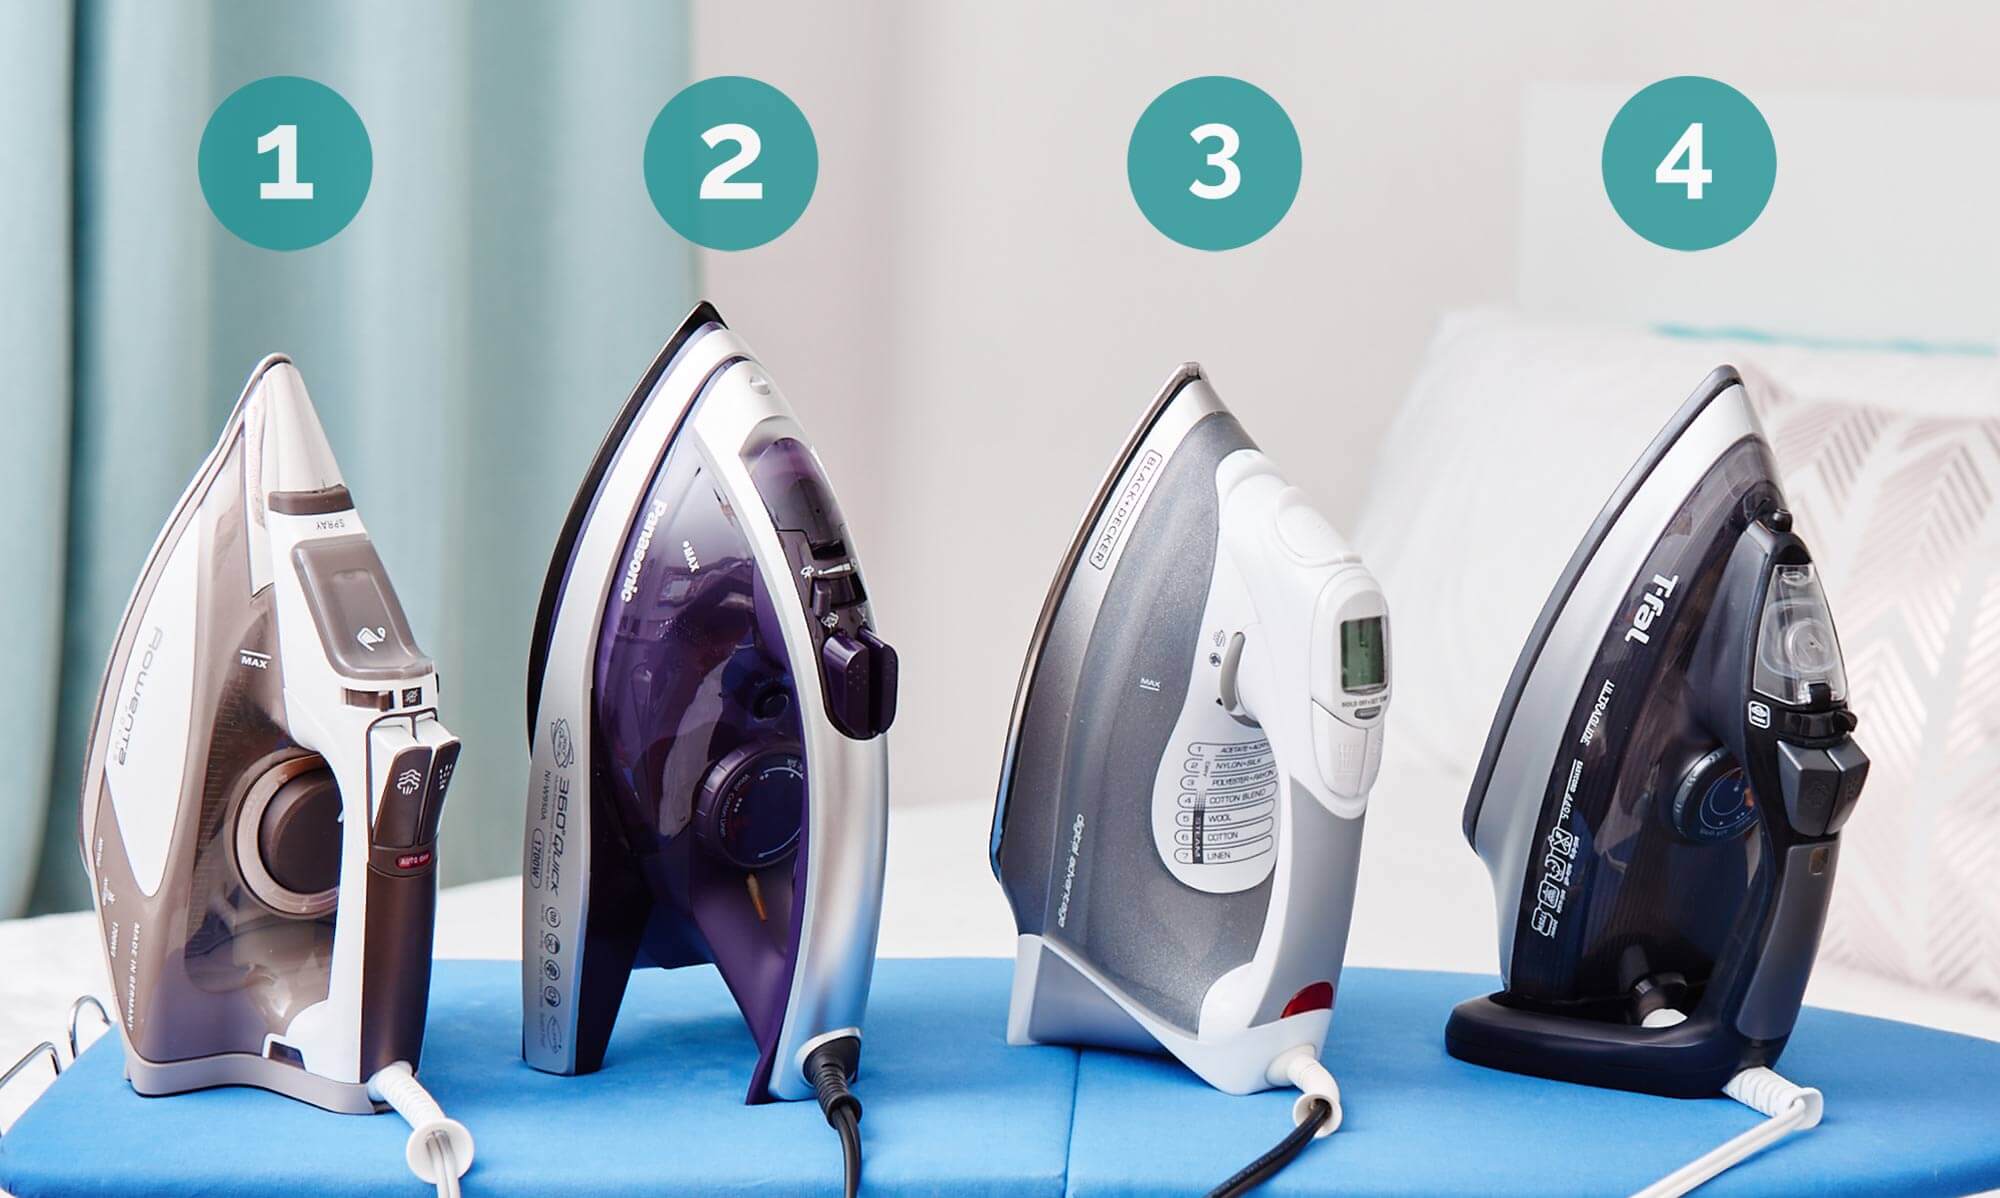 what's the best steam iron